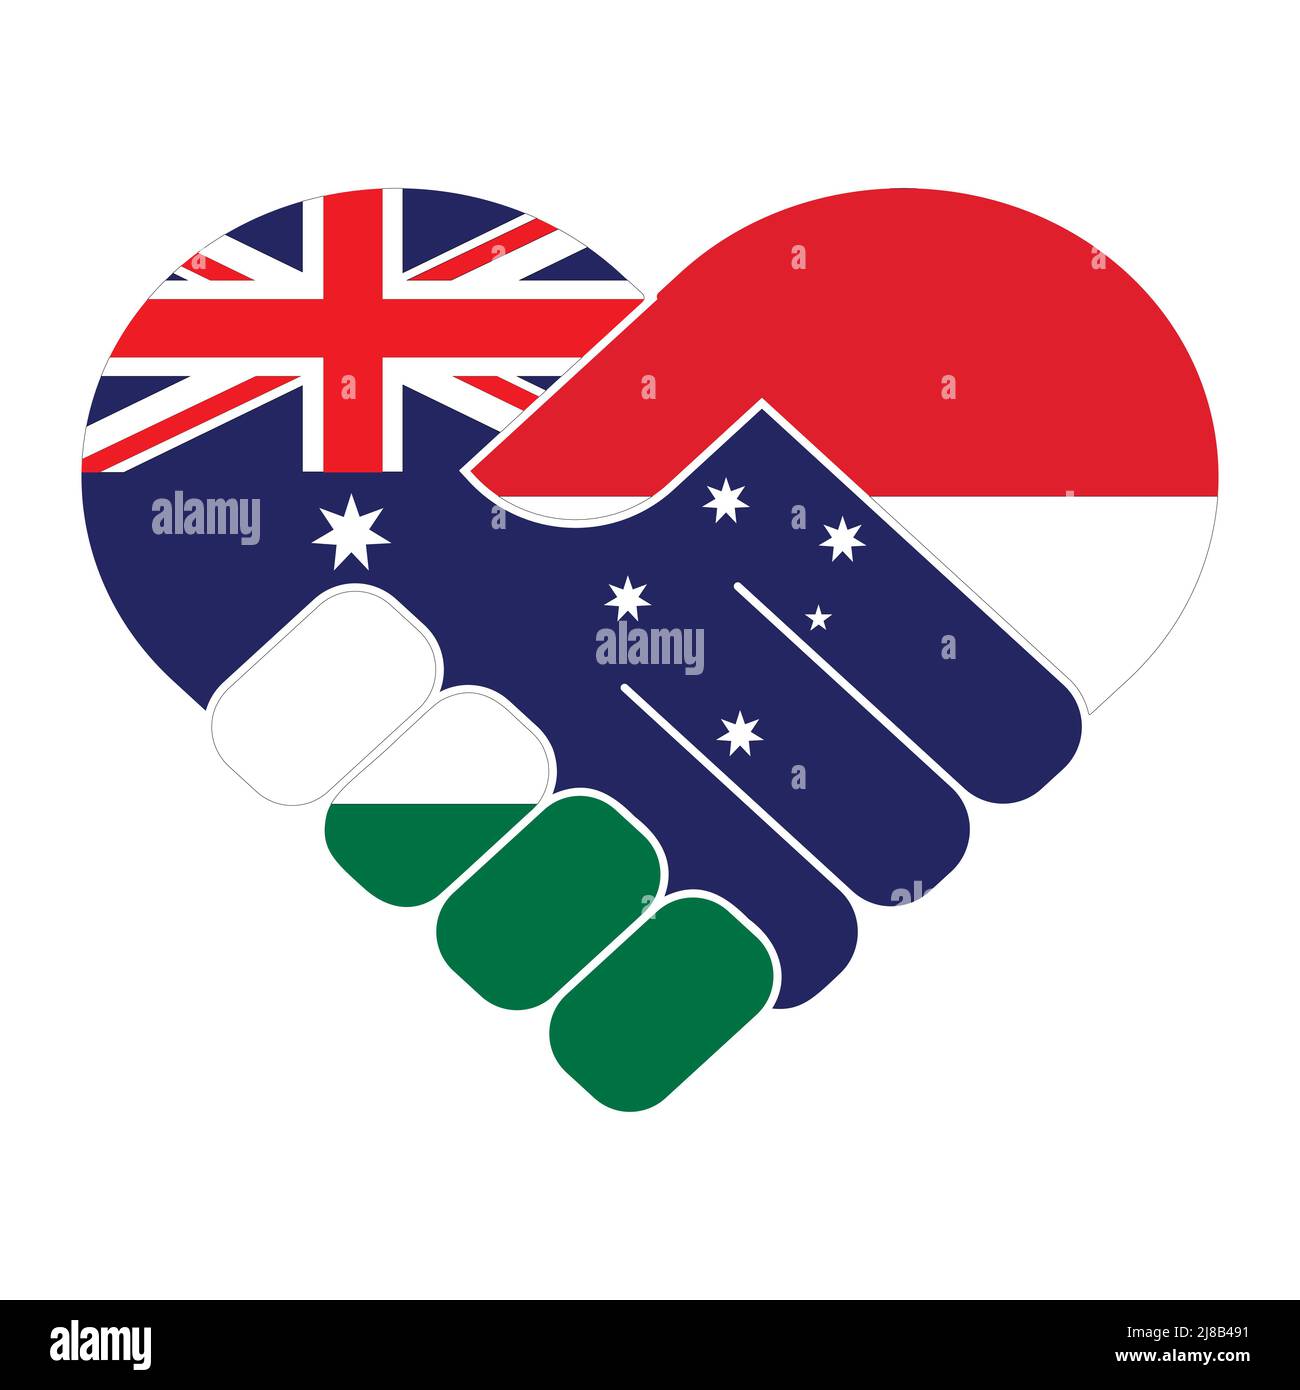 Handshake symbol in the colors of the national flags of Australia and Hungary, forming a heart. The concept of peace, friendship. Stock Vector